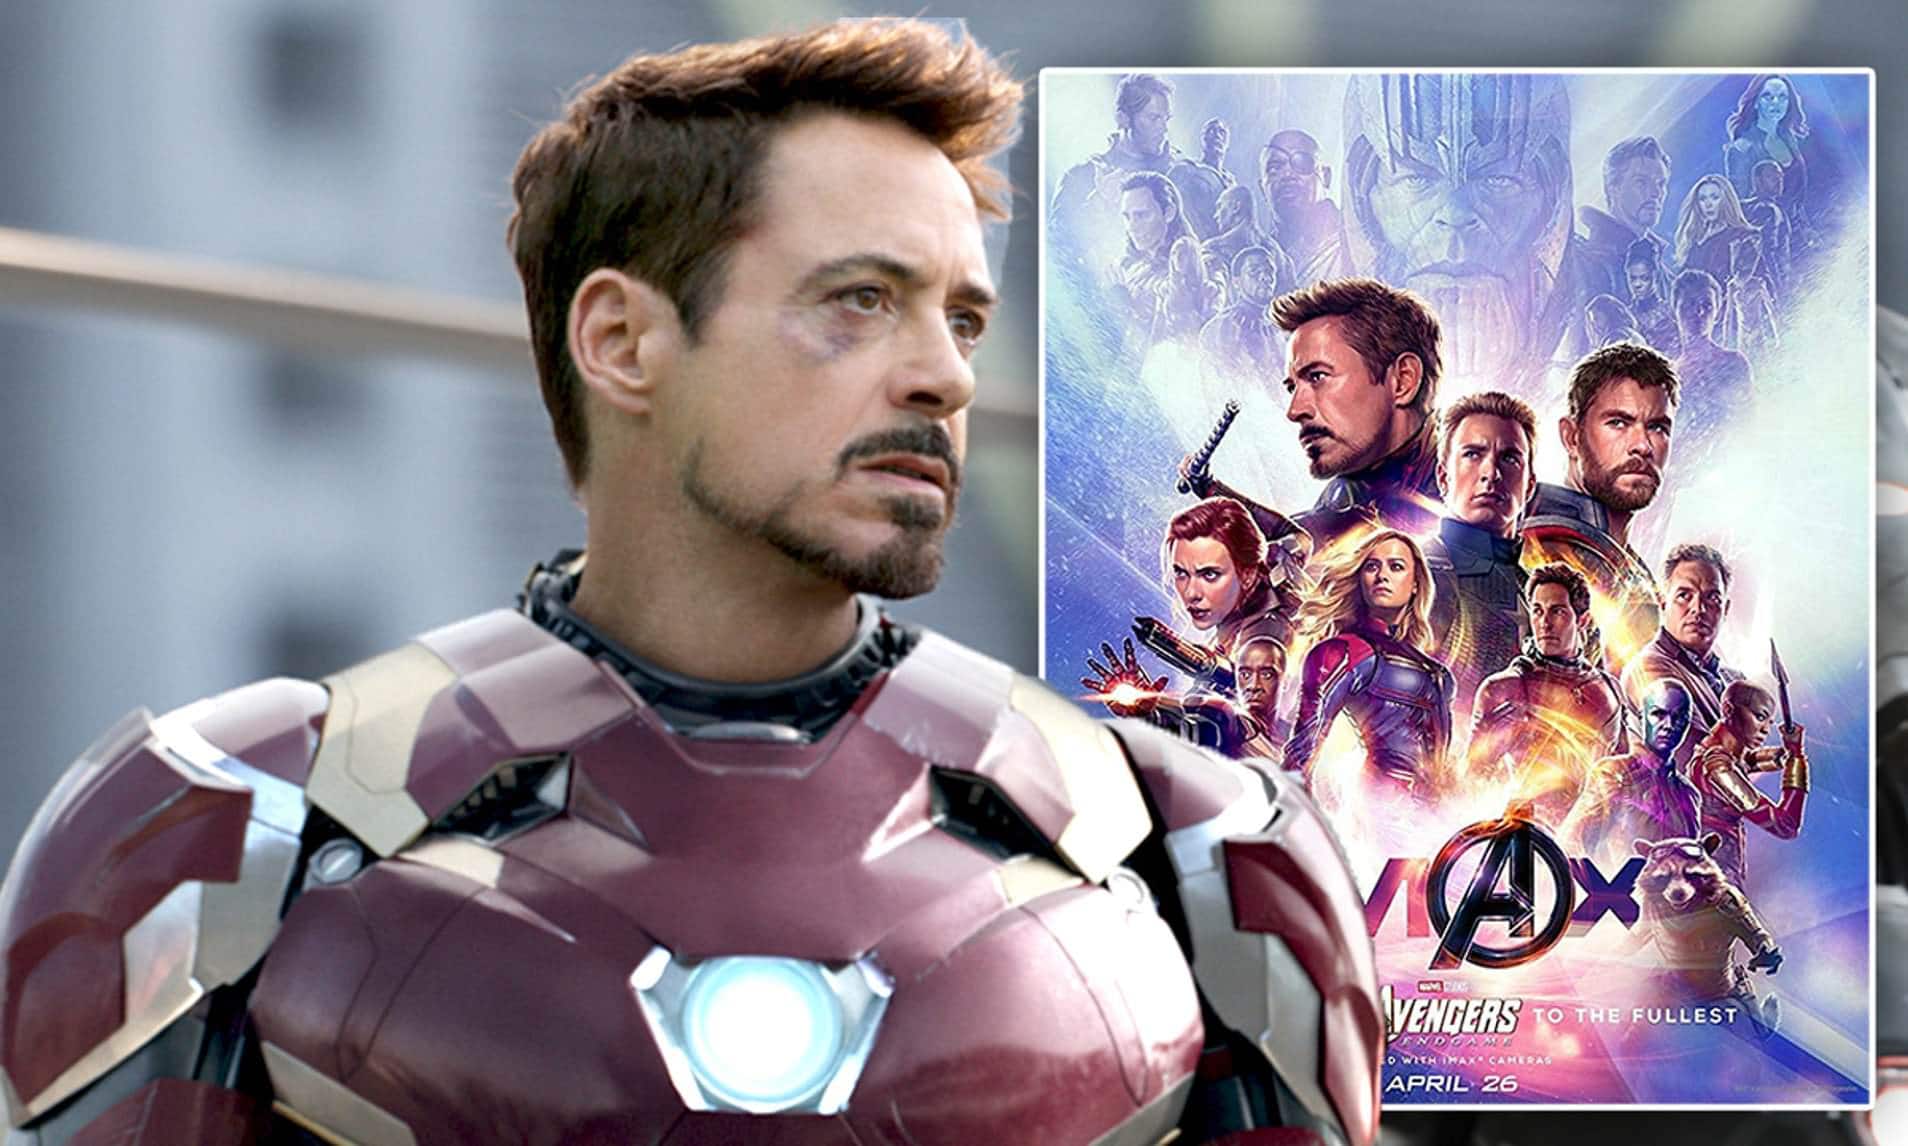 Robert Downey Jr. was one of the few cast members to read the whole Infinity War and Endgame script. Pic courtesy: dailymail.co.uk